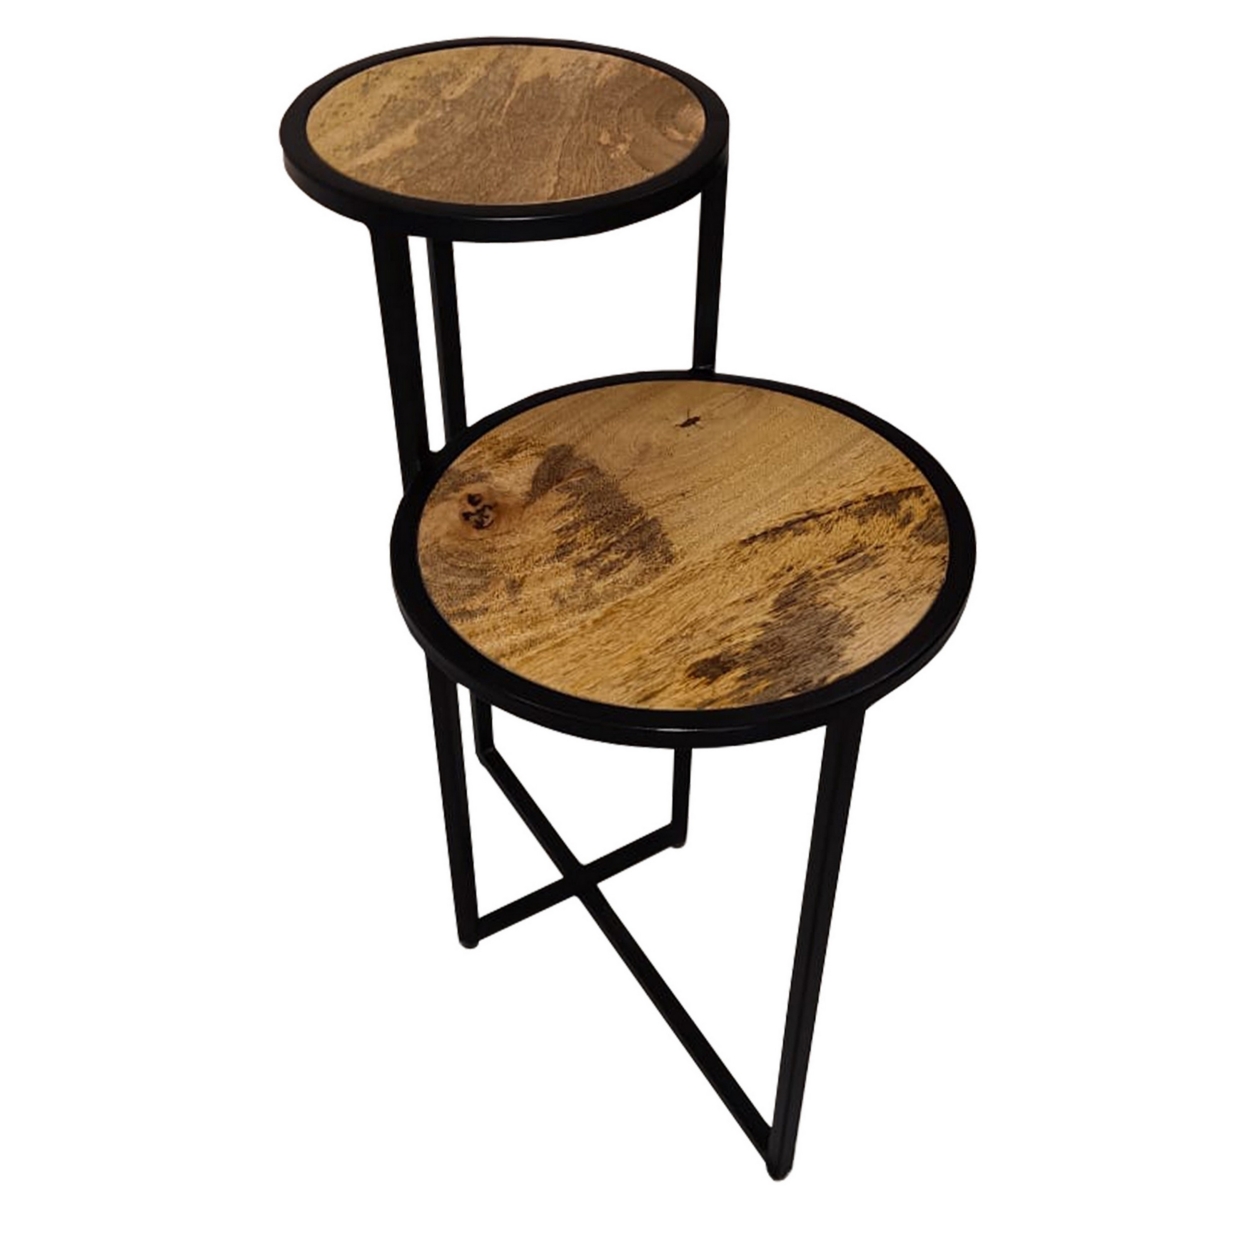 Two Tier Round Wooden Side Table With Metal Frame, Brown And Brass- Saltoro Sherpi